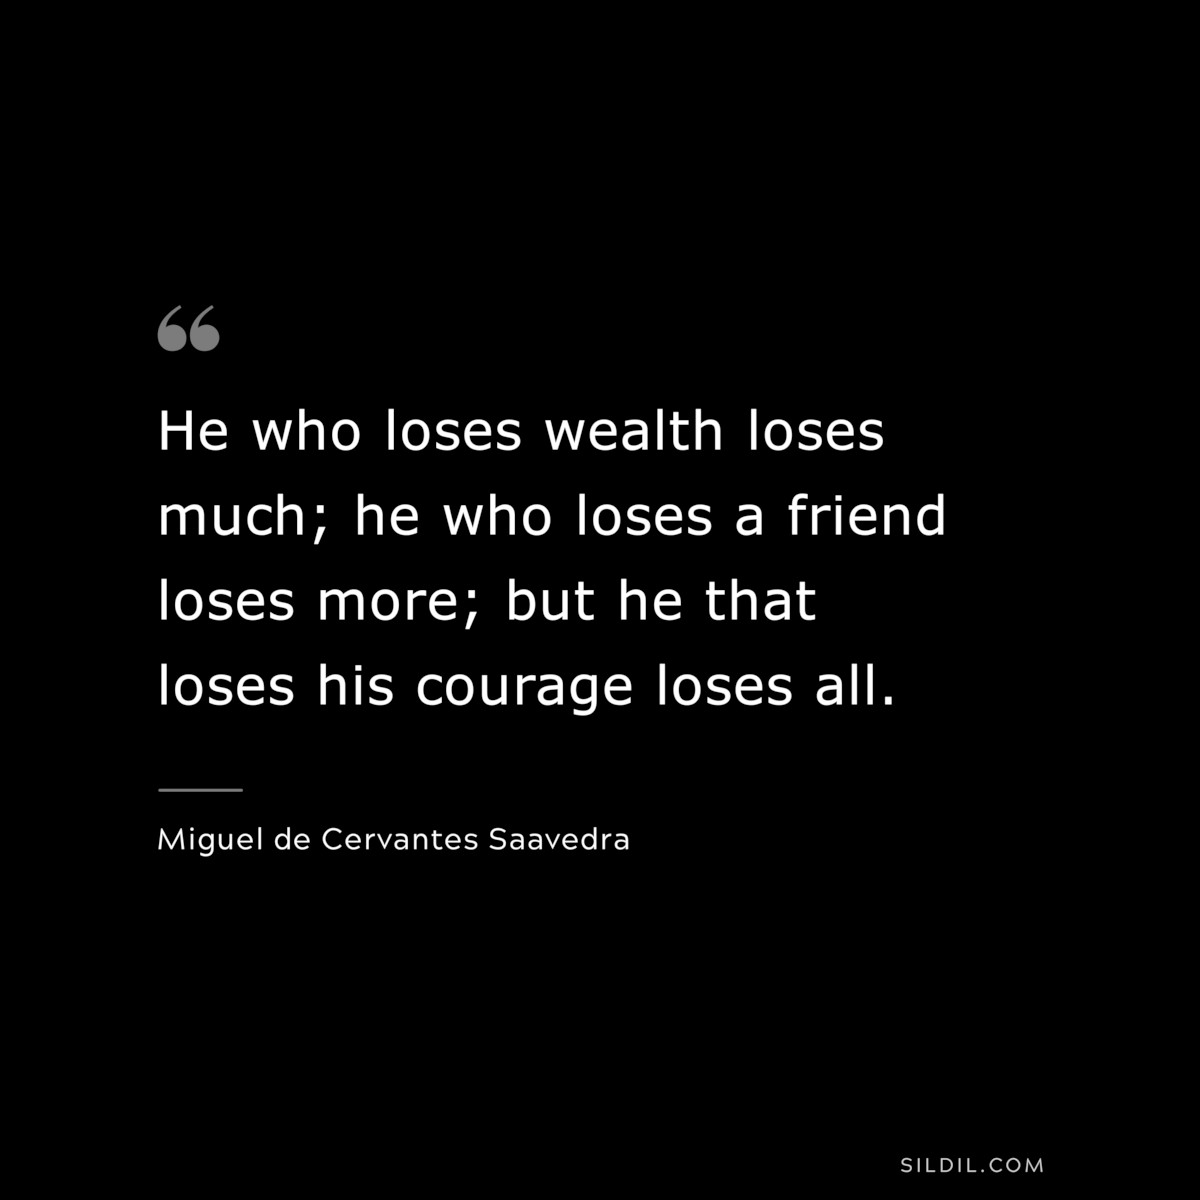 He who loses wealth loses much; he who loses a friend loses more; but he that loses his courage loses all. ― Miguel de Cervantes Saavedra